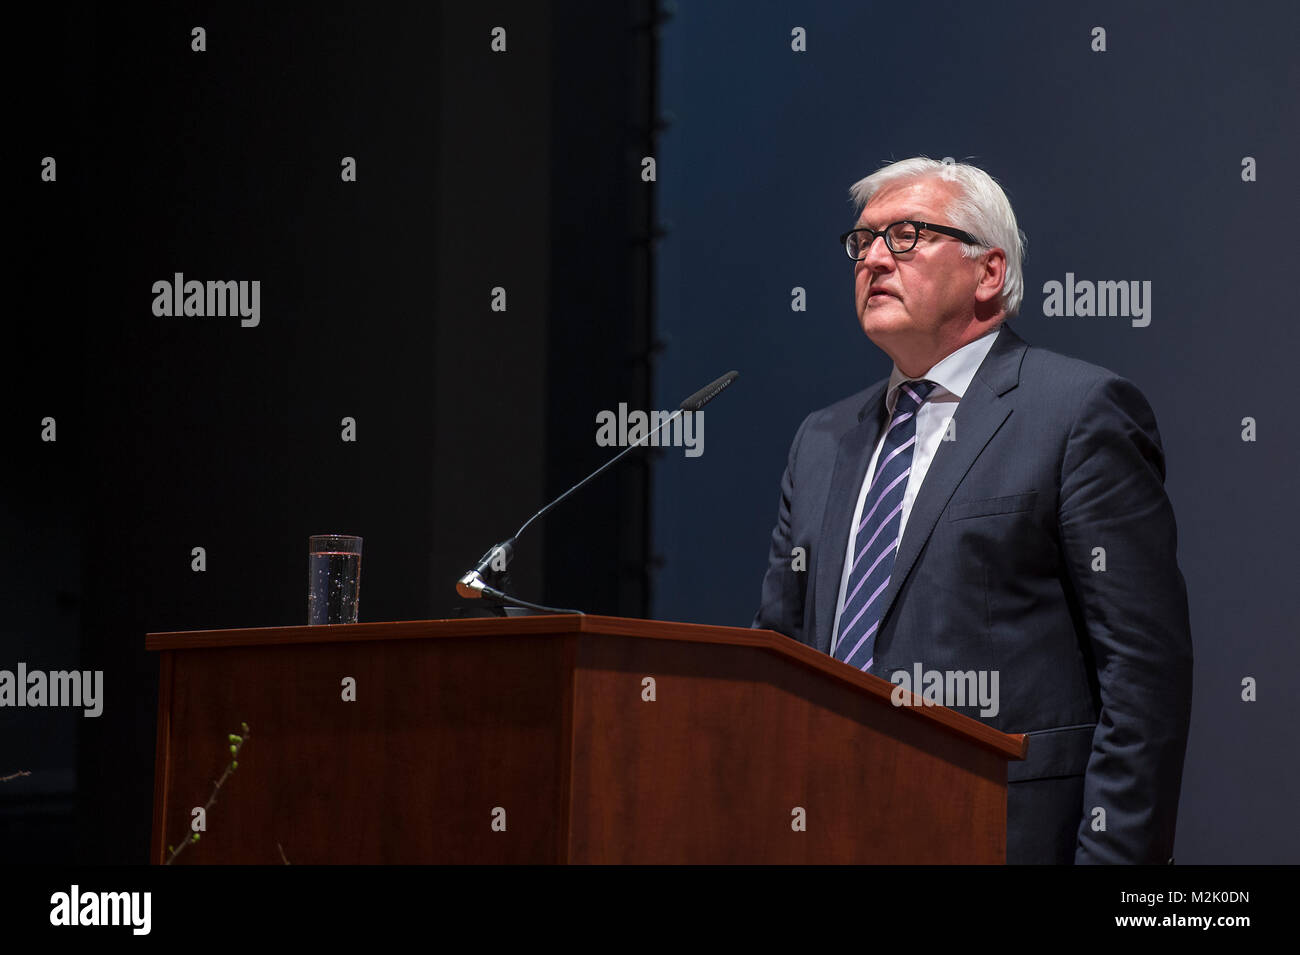 German Minister for Foreign Affairs, Frank-Walter Steinmeier (SPD) presided the handover ceremony of the outgoing Secretaries of State Emily Haber and Harald Braun to their respective successors in office, Stephan Steinlein and Markus Ederer. The ceremony took place in Auswärtiges Amt. Stock Photo